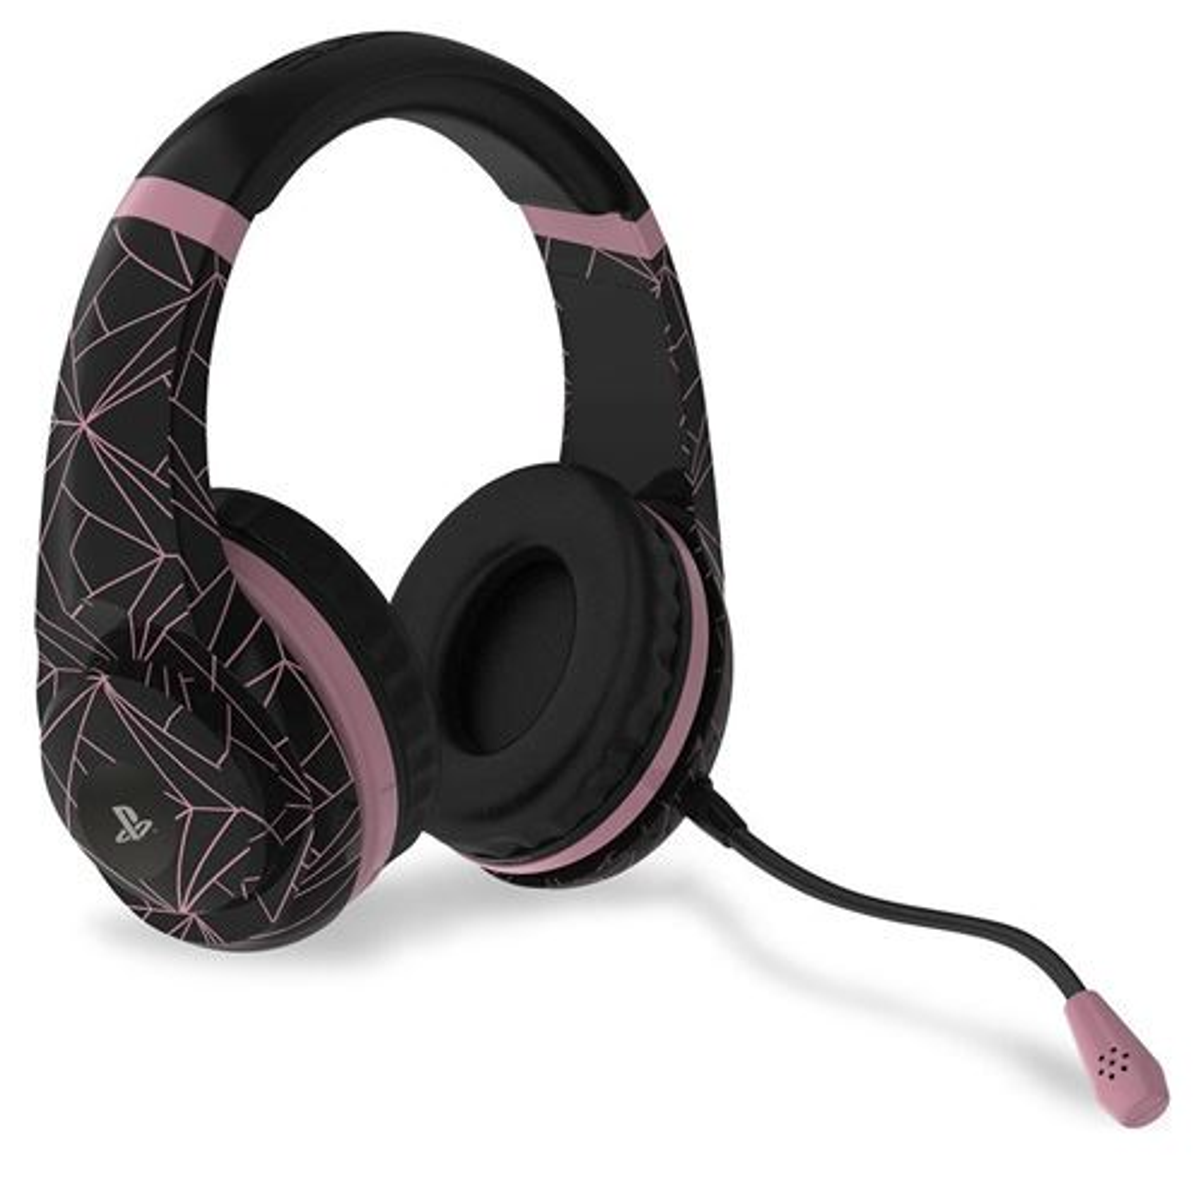 GAMERS ROSE 4 BLK Headset Schwarz/Roségold GOLD.ED.-ABSTRACT, PRO4-70-RGA Gaming HEADSET On-ear